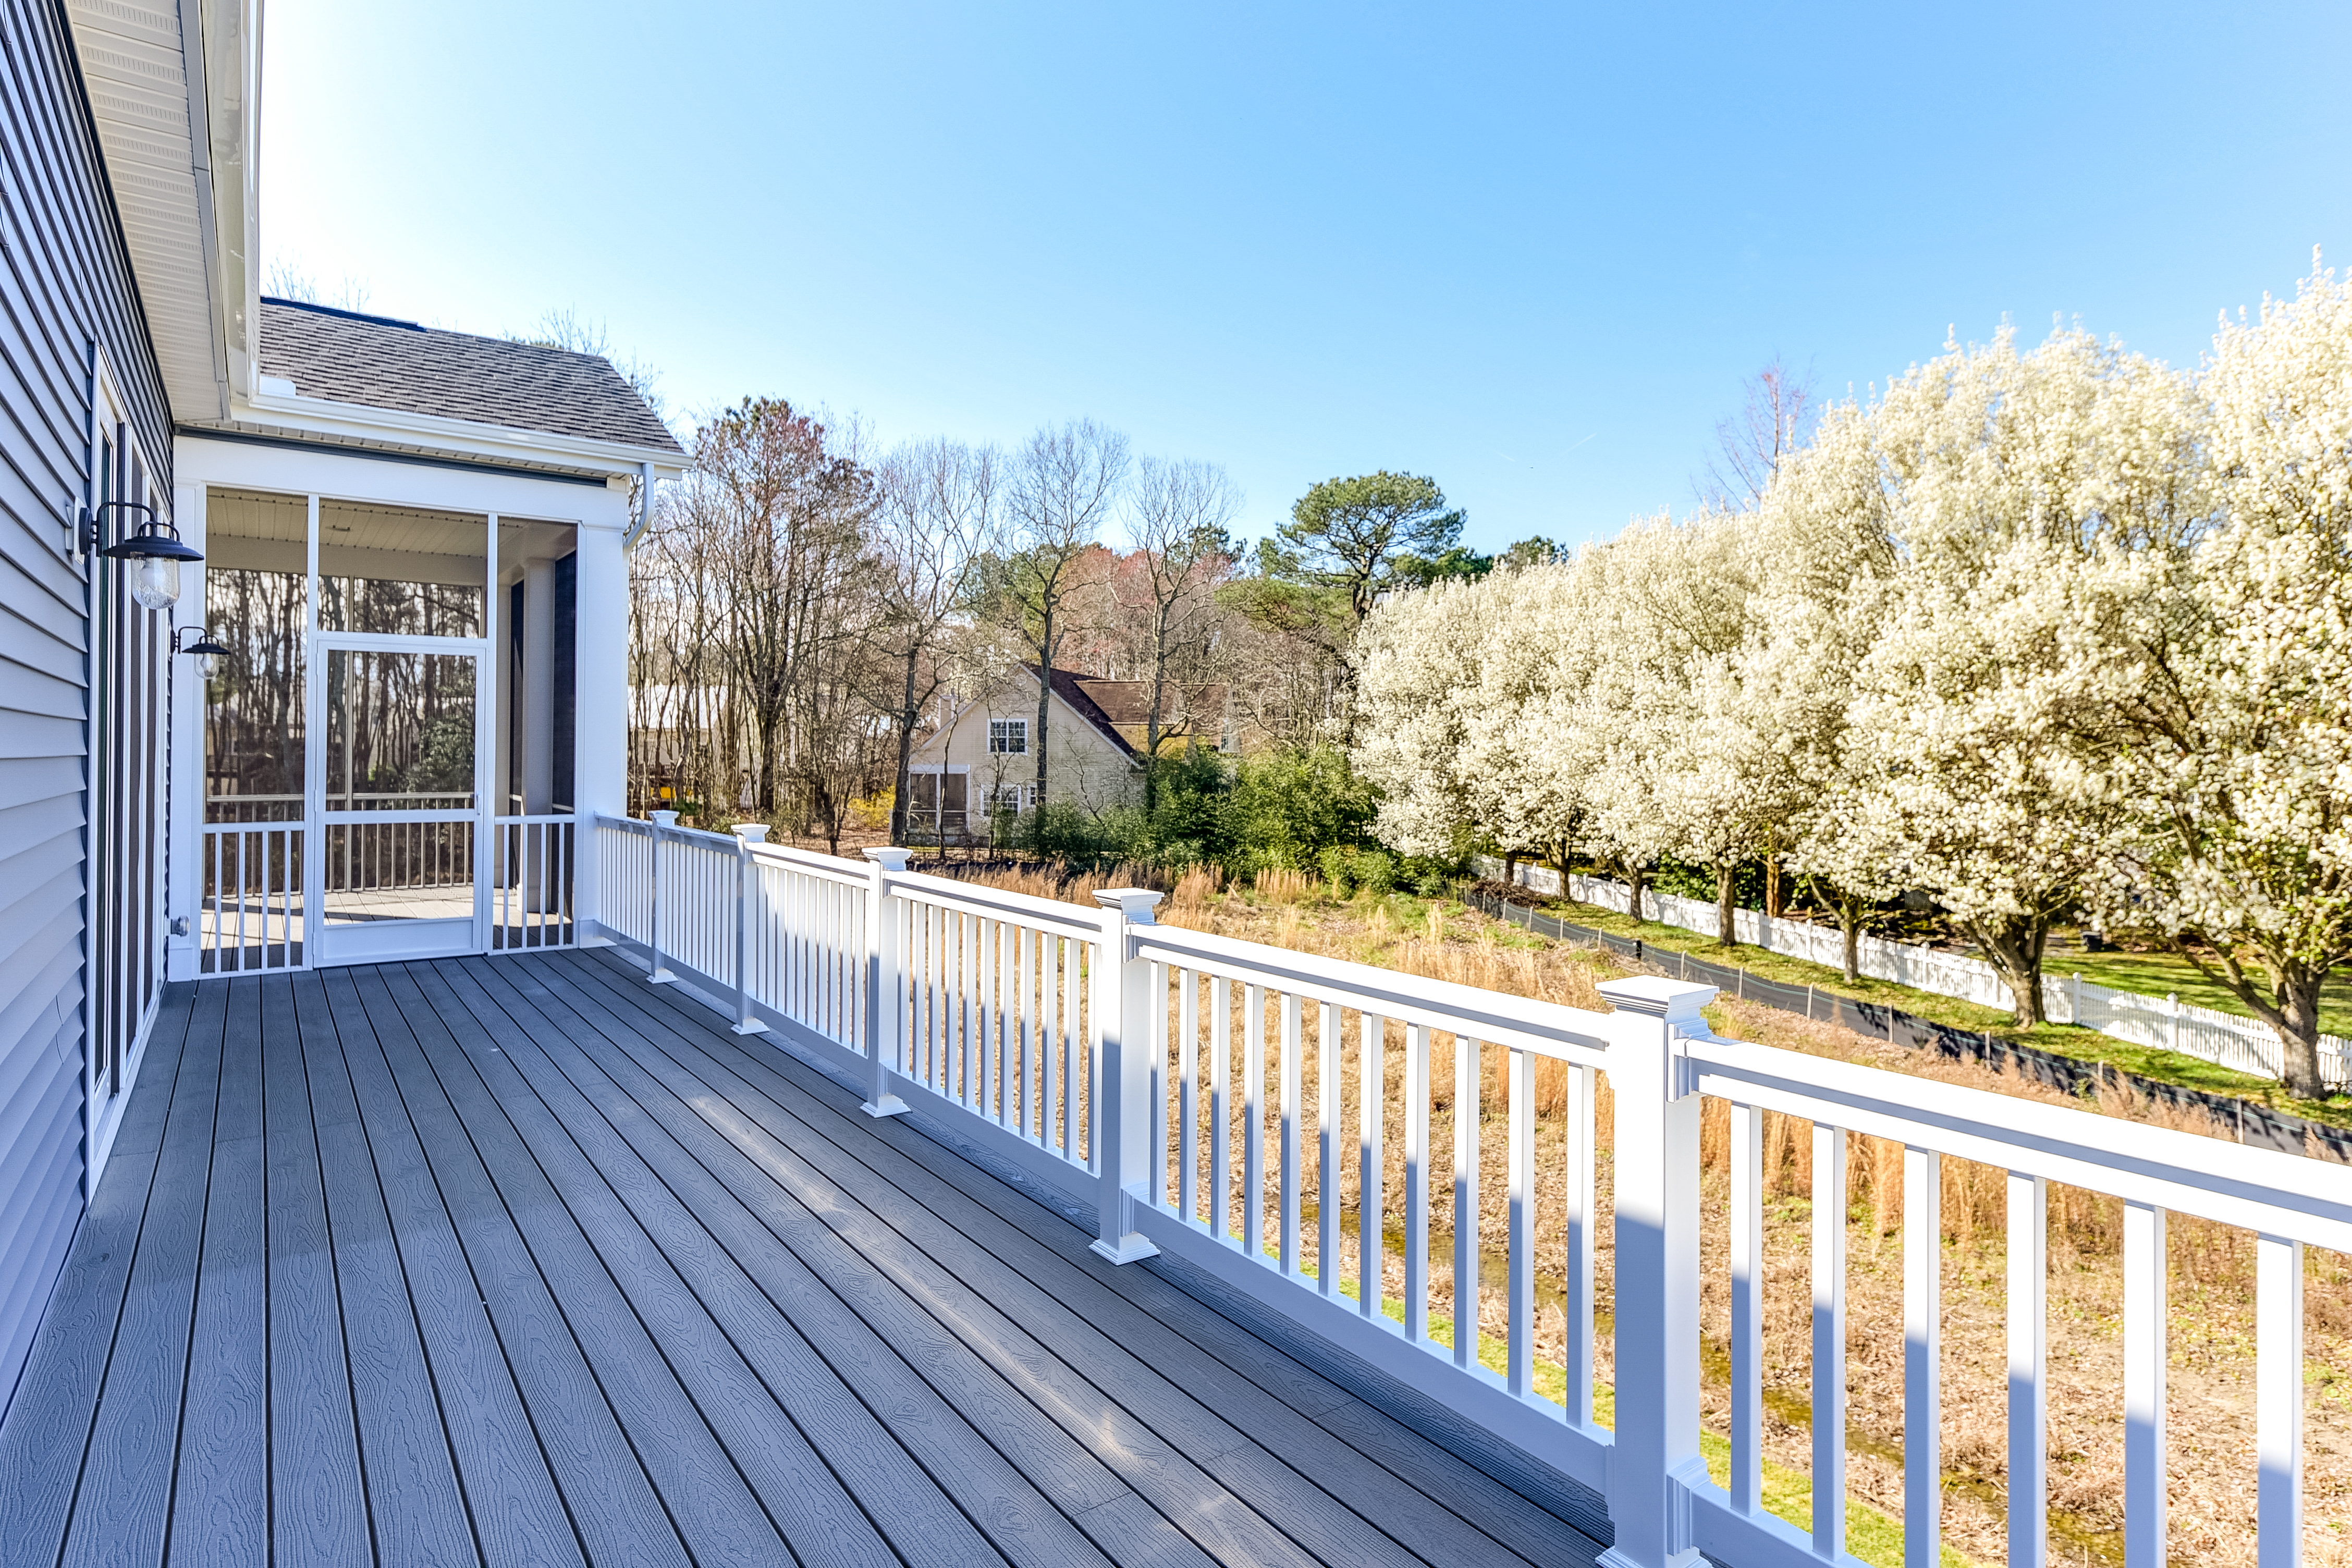 Spacious rear deck overlooking wooded area